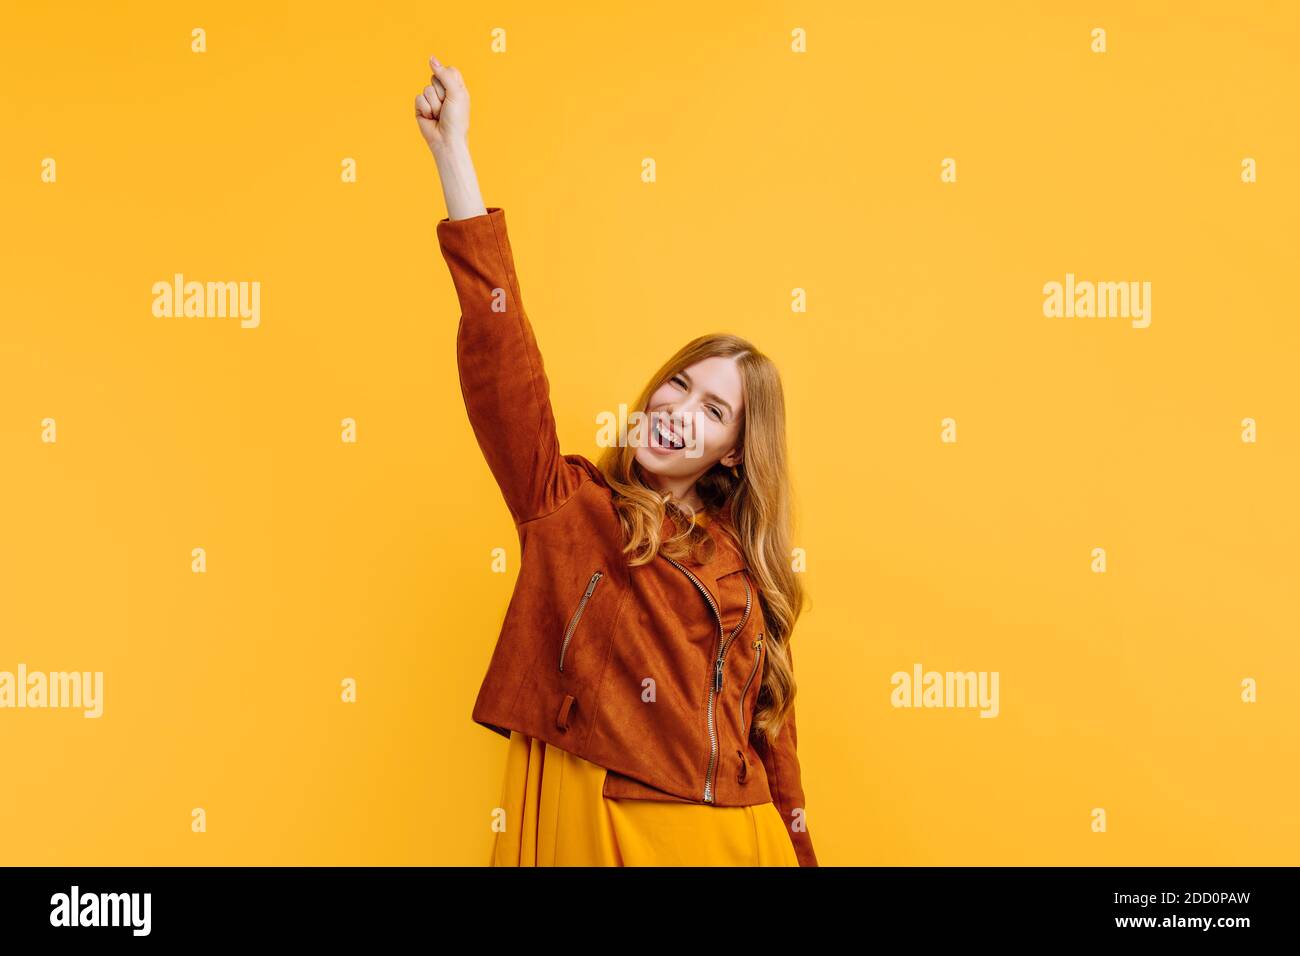 excited shocked screaming happy beautiful girl, in a bright yellow dress and autumn jacket, happily shows a winning gesture while standing on an isola Stock Photo